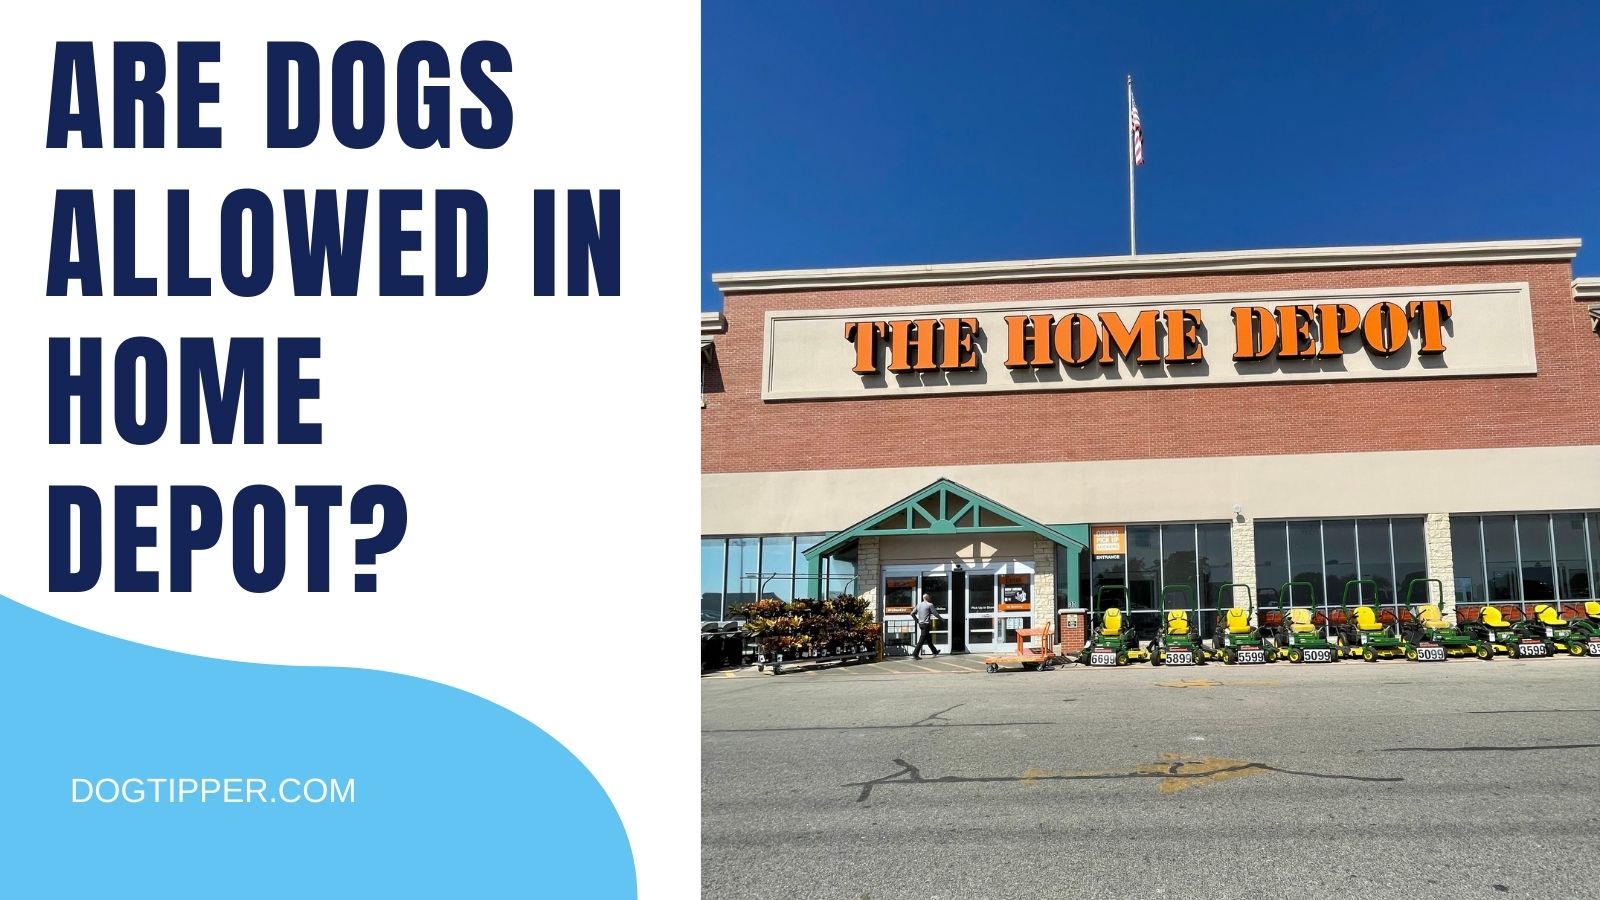 Does Home Depot Allow Dogs? - Dog Tipper